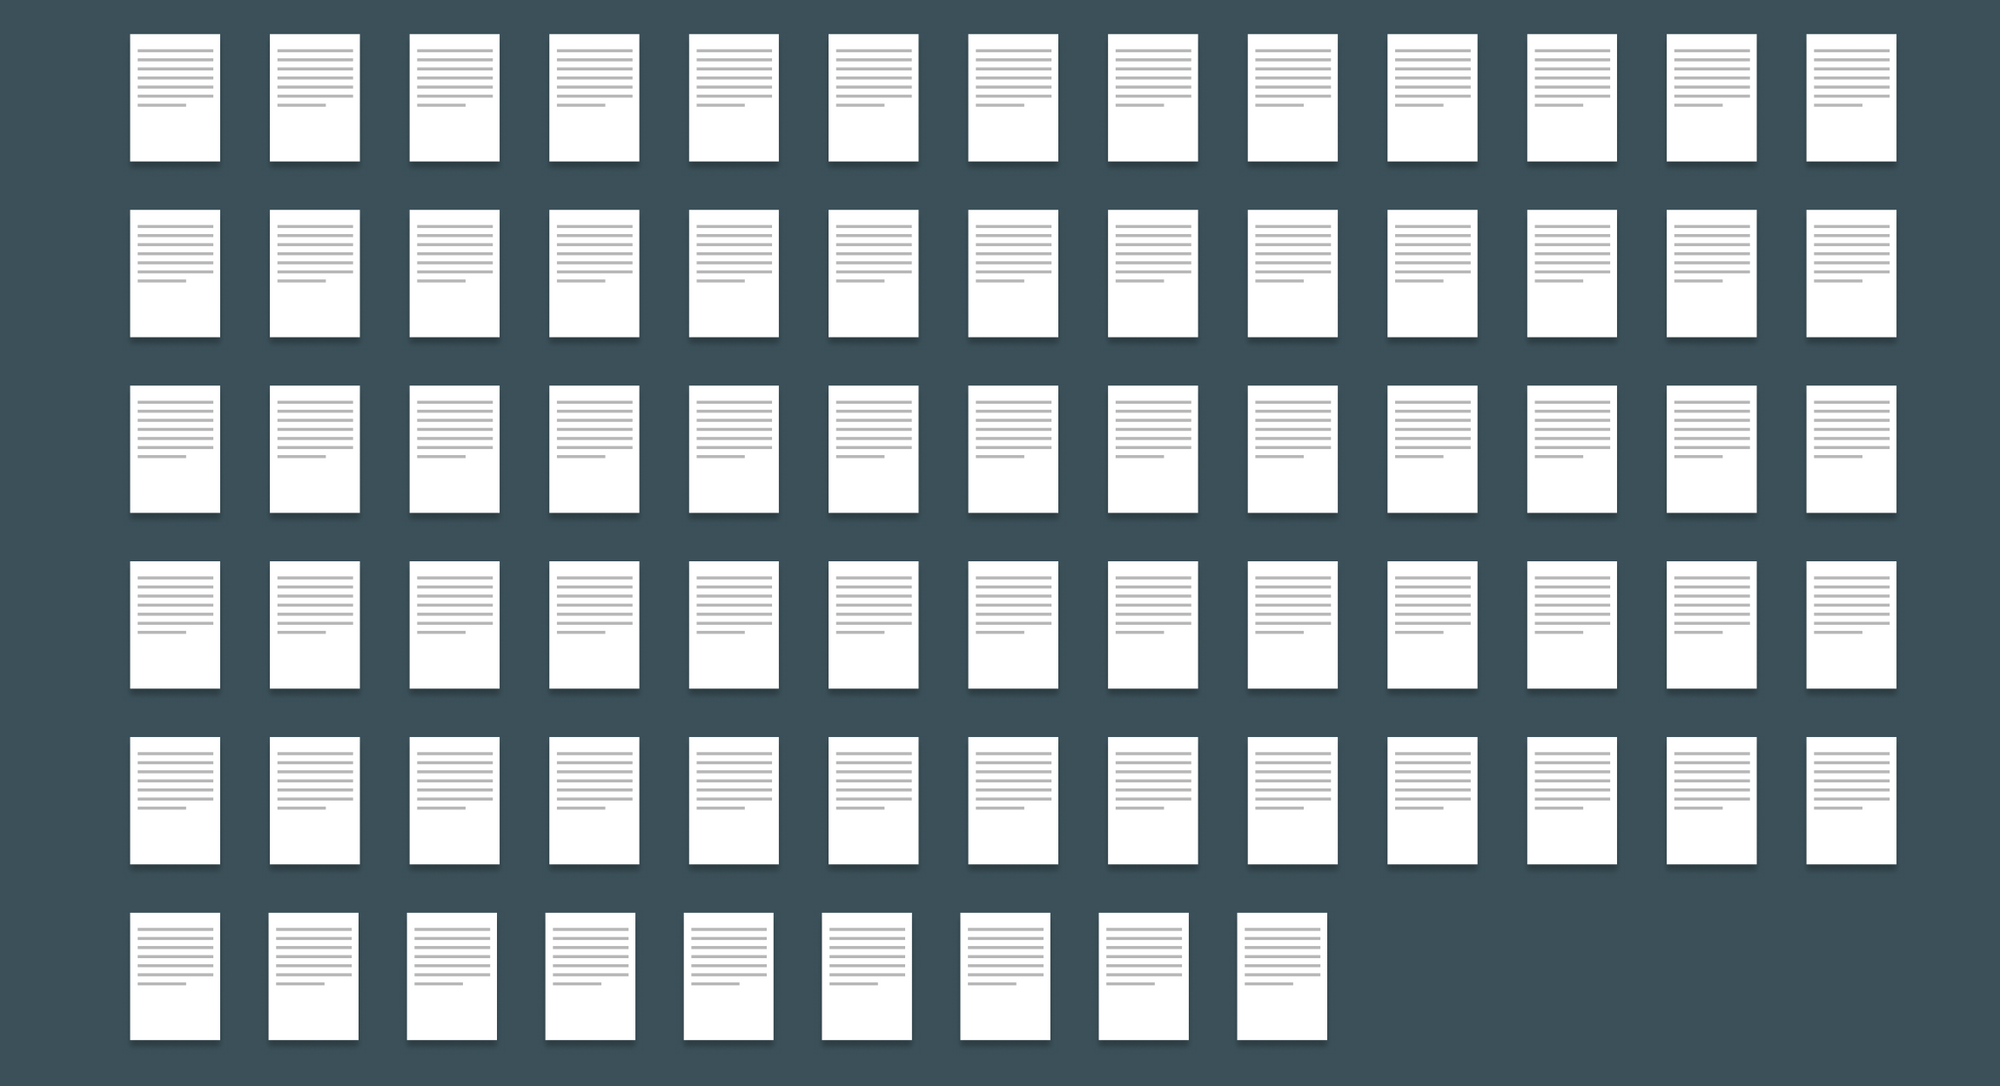 An image with many rows of pages.